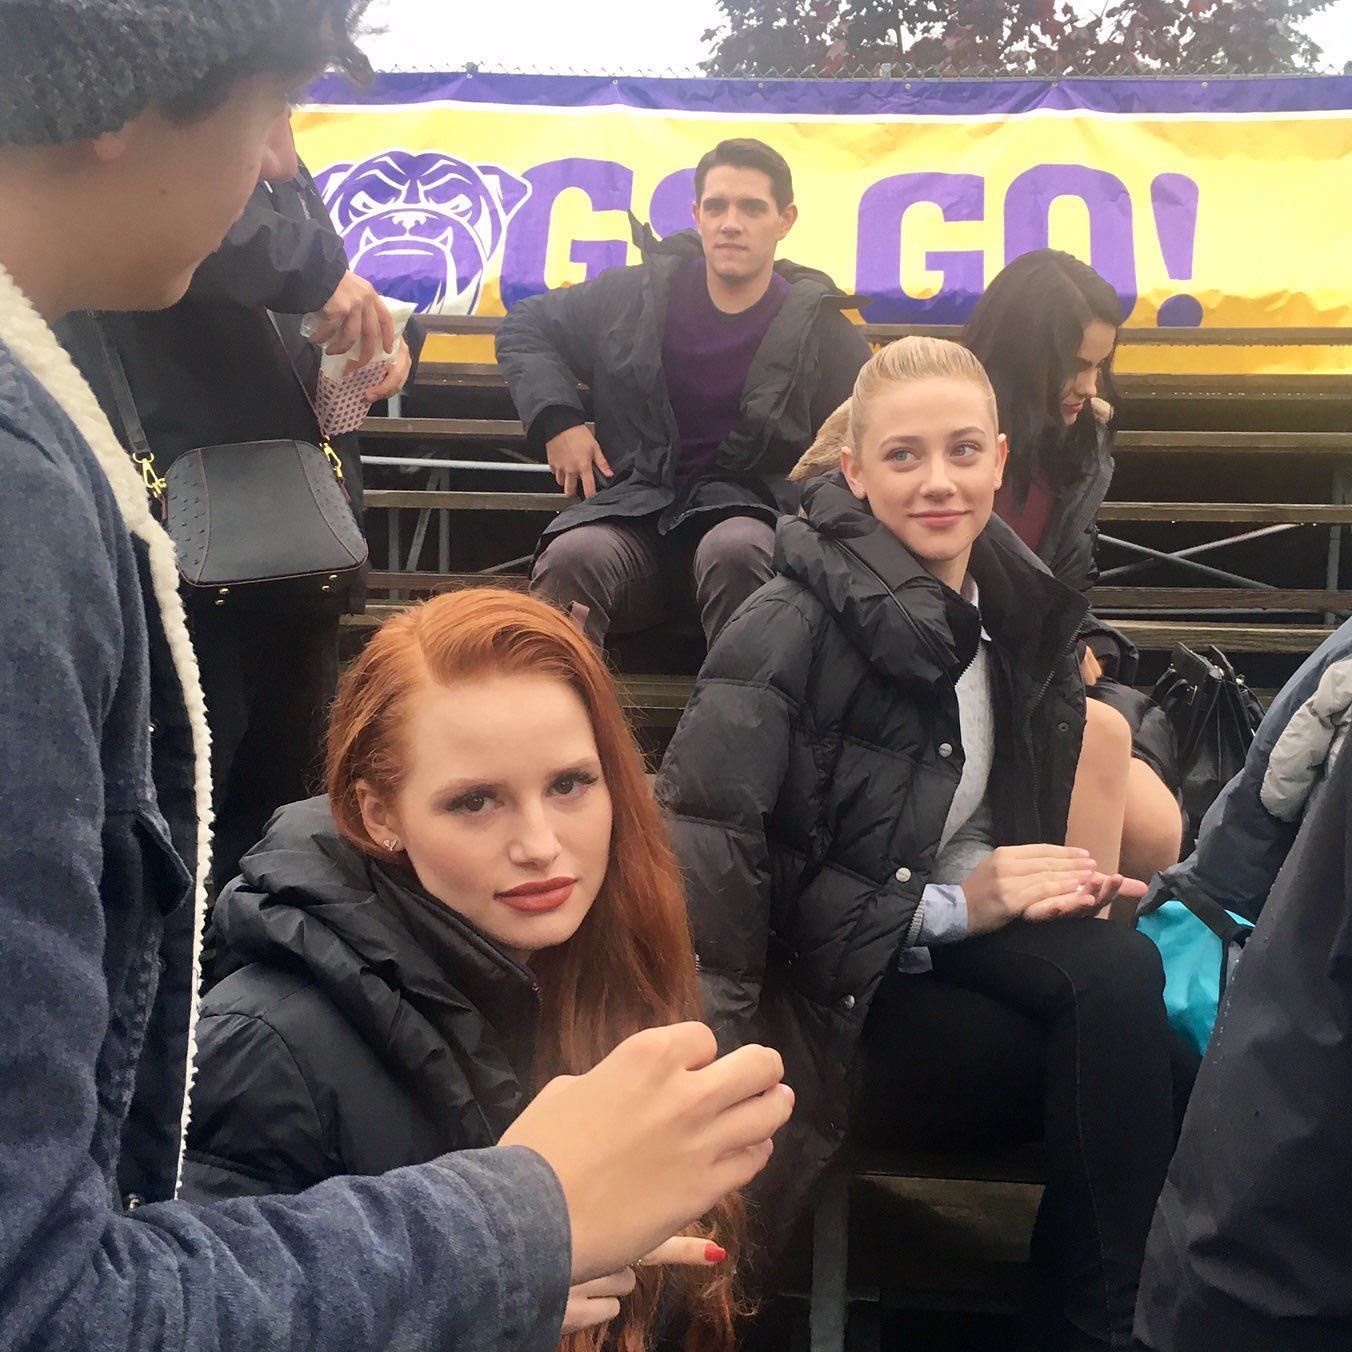 Madelaine Petsch shares a behind-the-scenes photo from the 